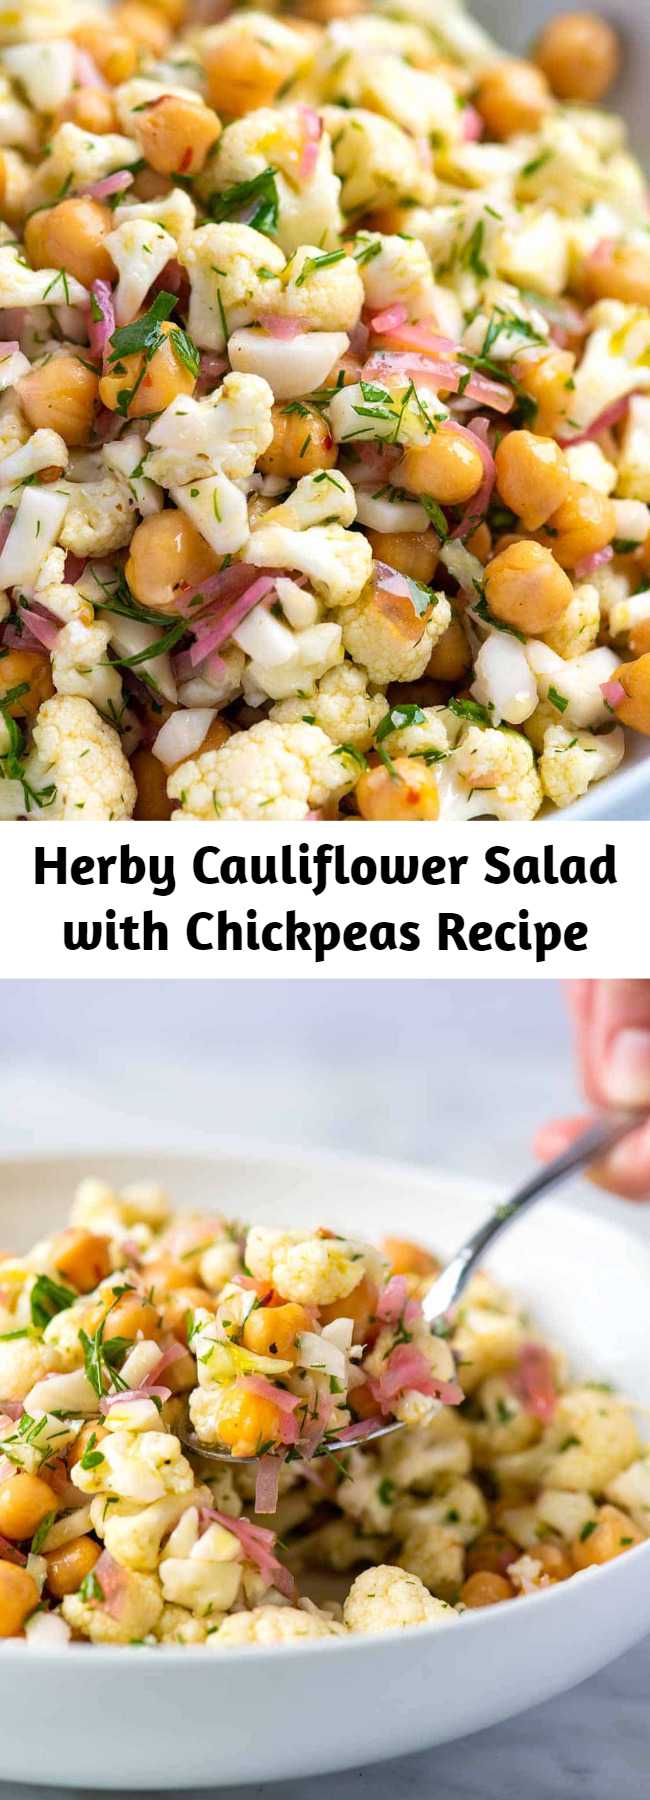 Herby Cauliflower Salad with Chickpeas Recipe - hanks to a light lemony dressing and lots of fresh herbs, this simple raw cauliflower salad recipe tastes surprisingly delicious and lasts in the fridge for days. The pickled onions are an optional ingredient, but they do take the salad to the next level.